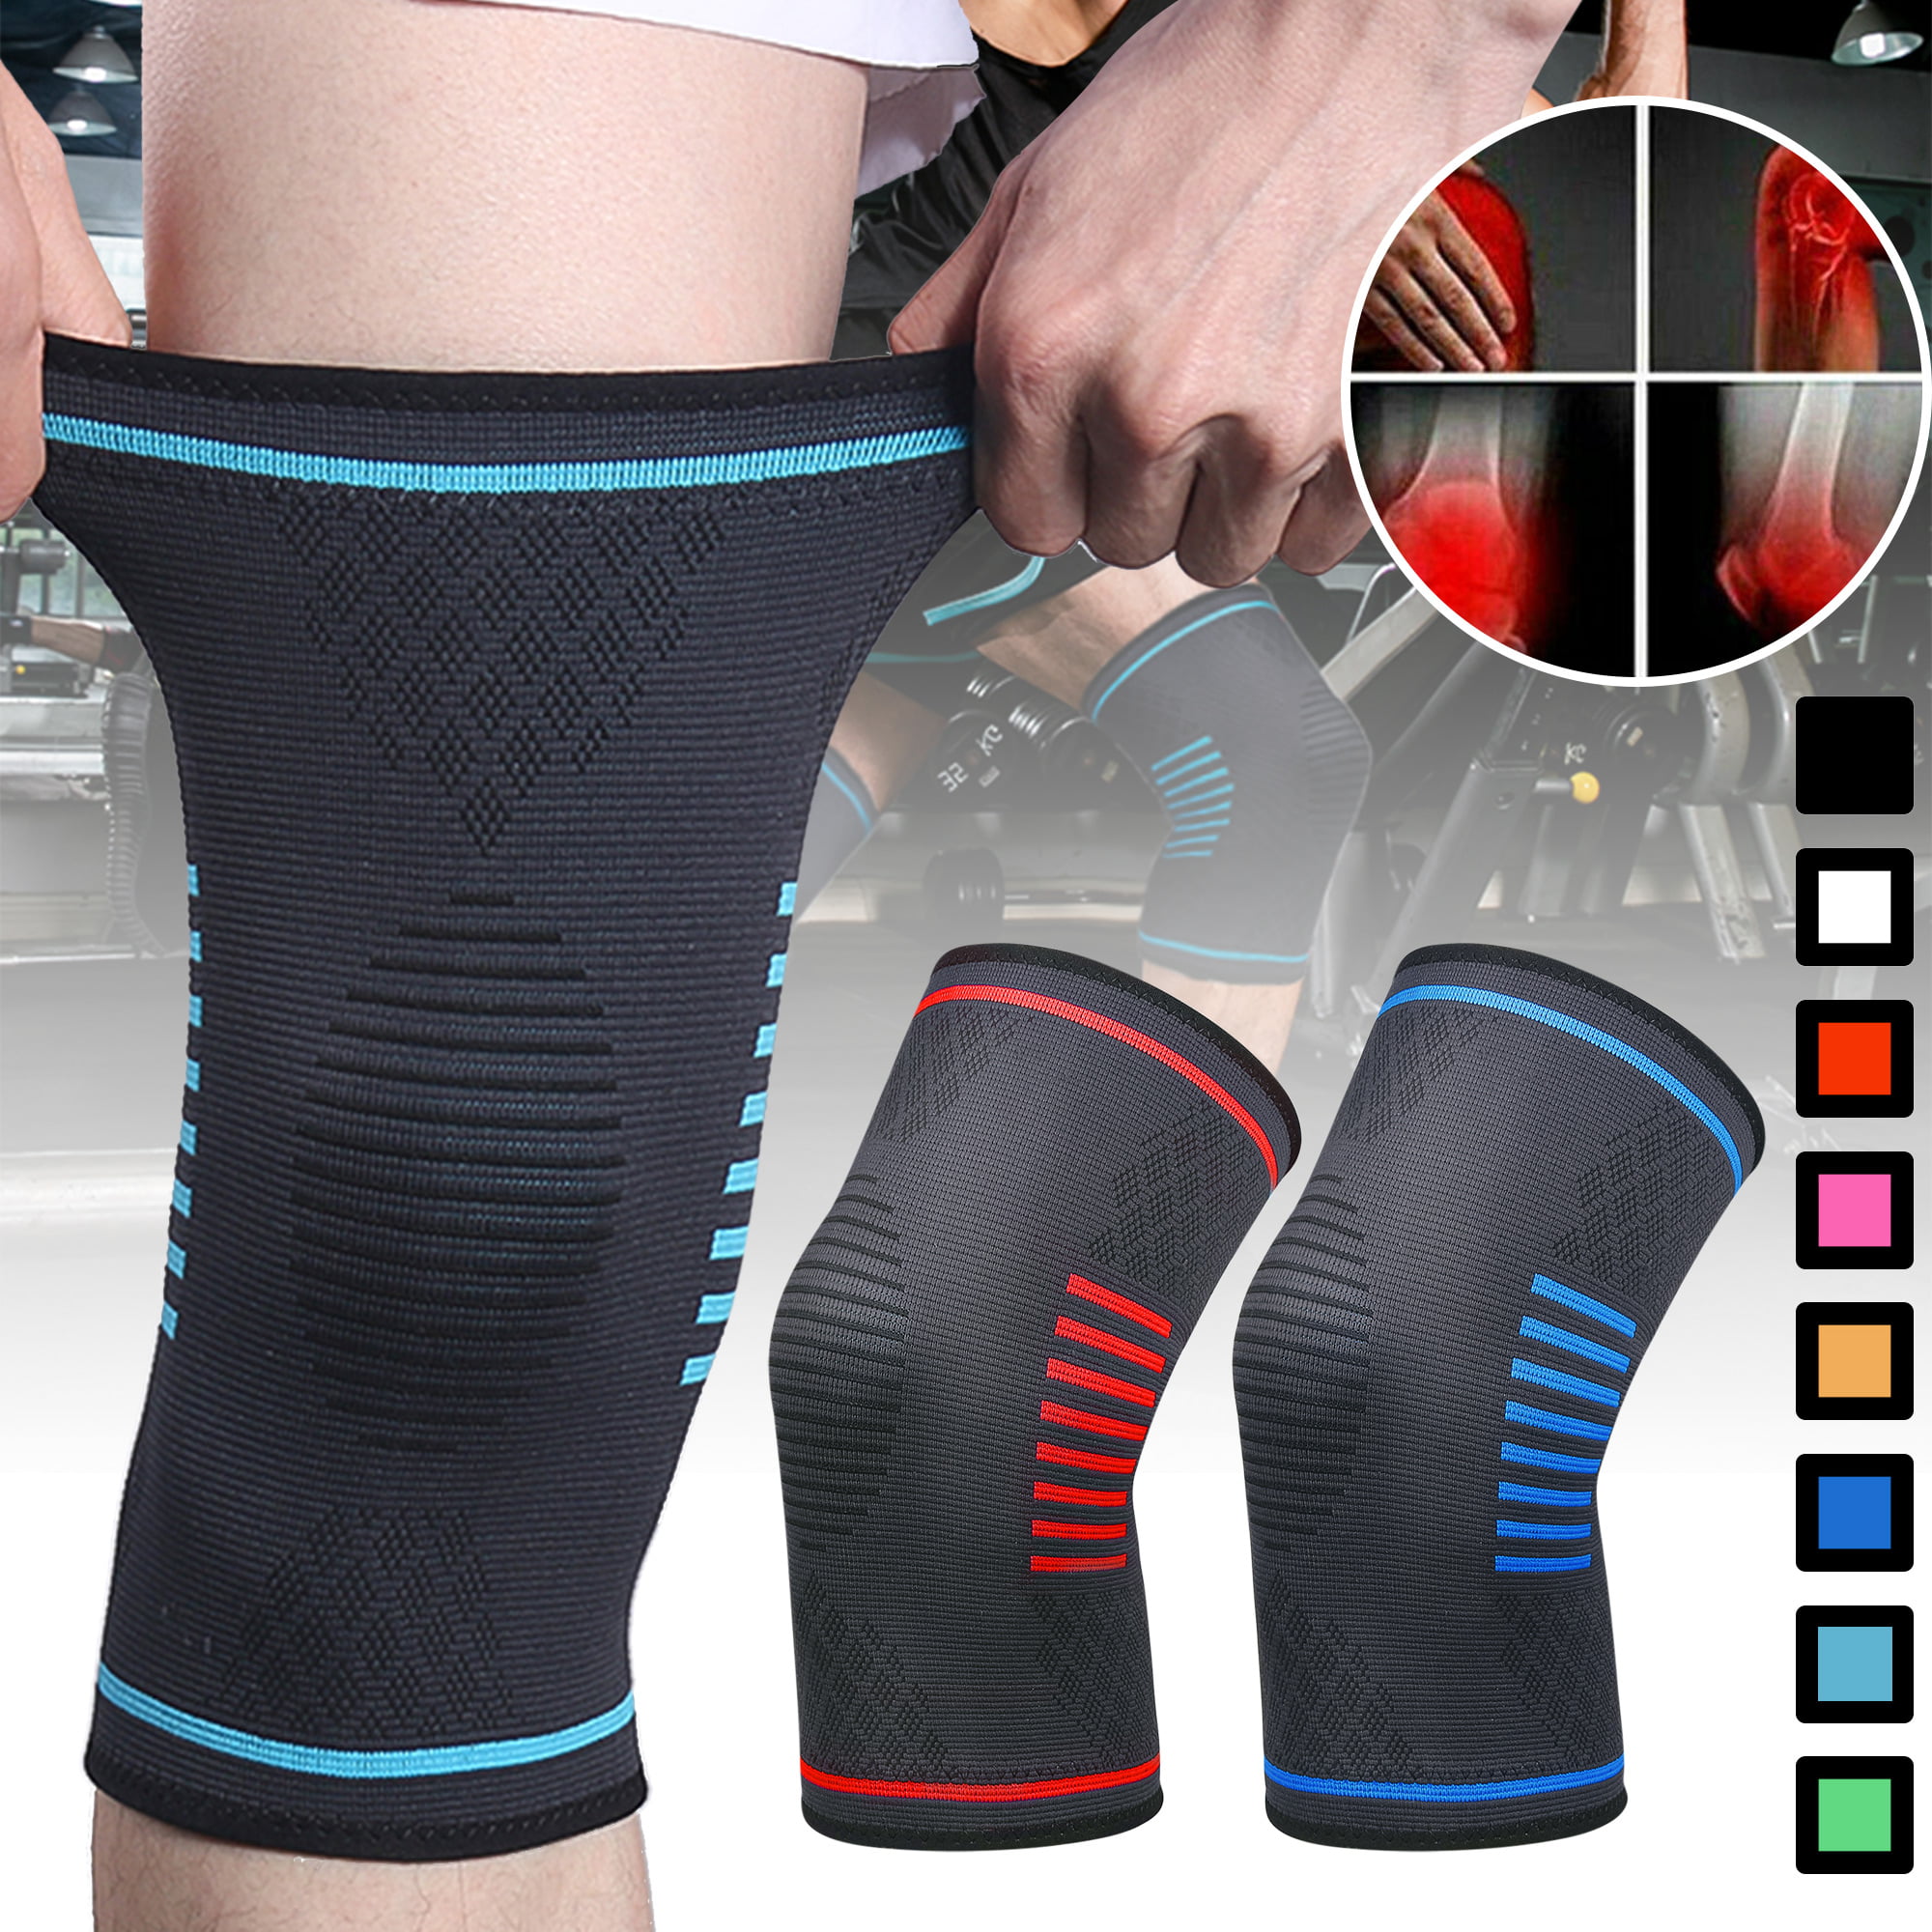 Fitness Knee Sleeves Management Arthritis Pain Very Strong 7mm Pair Knee Support